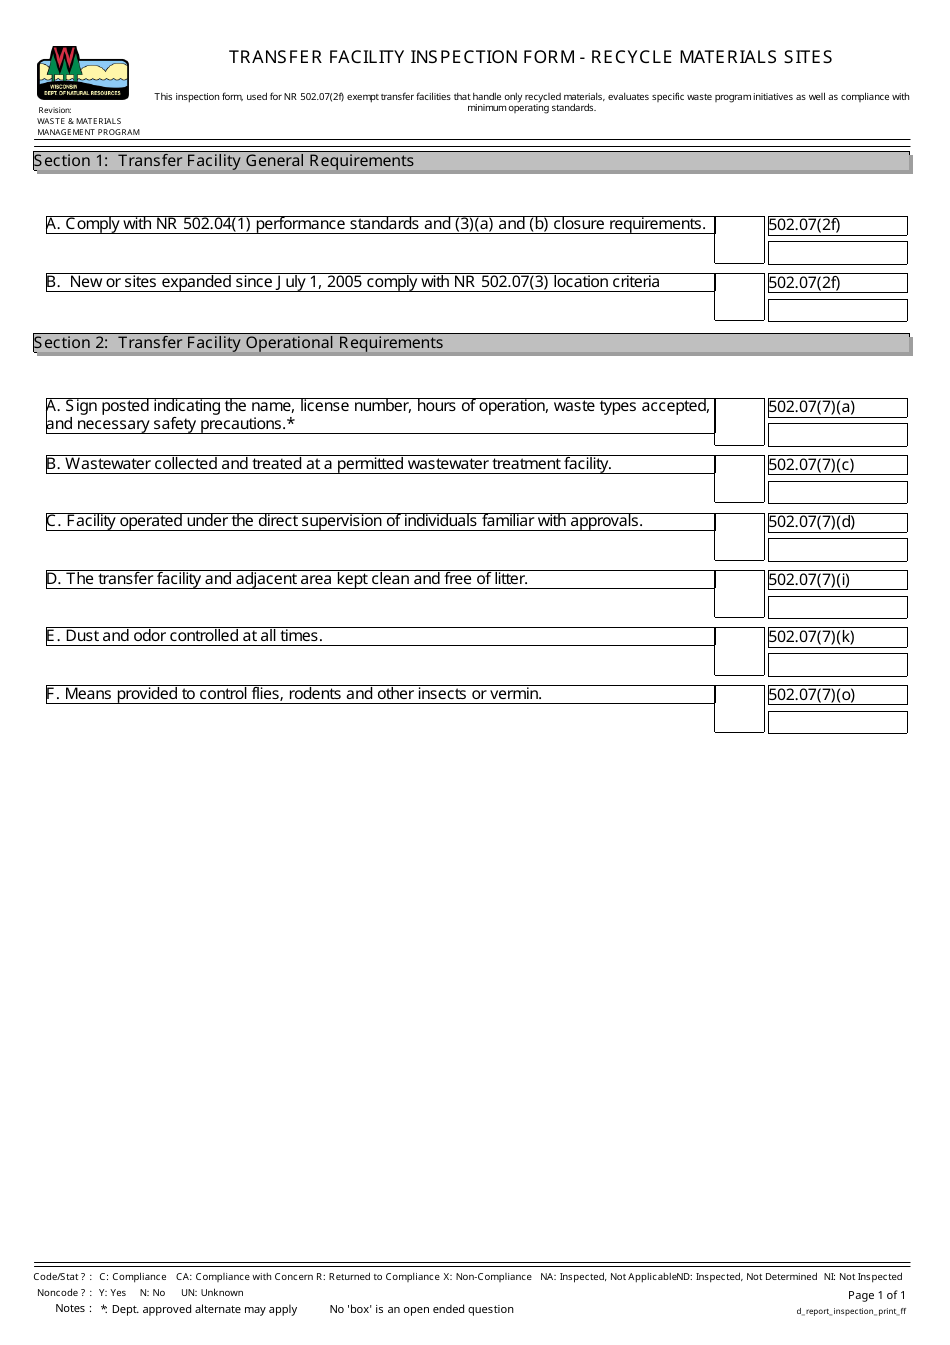 Transfer Facility Inspection Form - Recycle Materials Sites - Wisconsin, Page 1